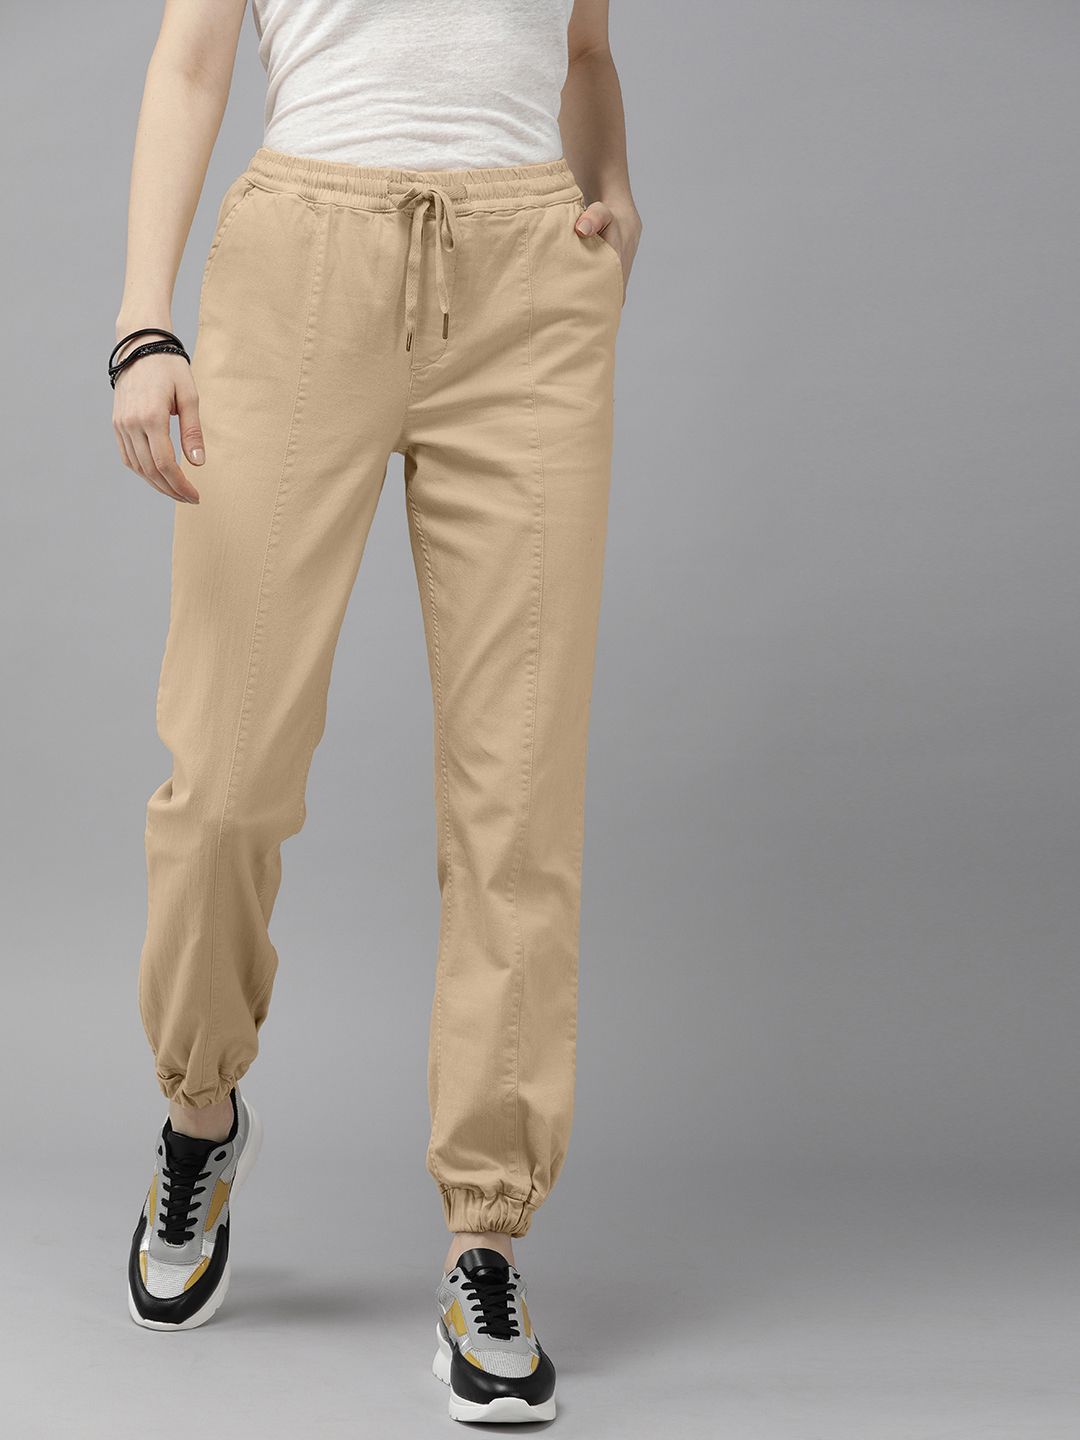 The Roadster Lifestyle Co Women Cream-Coloured High-Rise Joggers Trousers Price in India